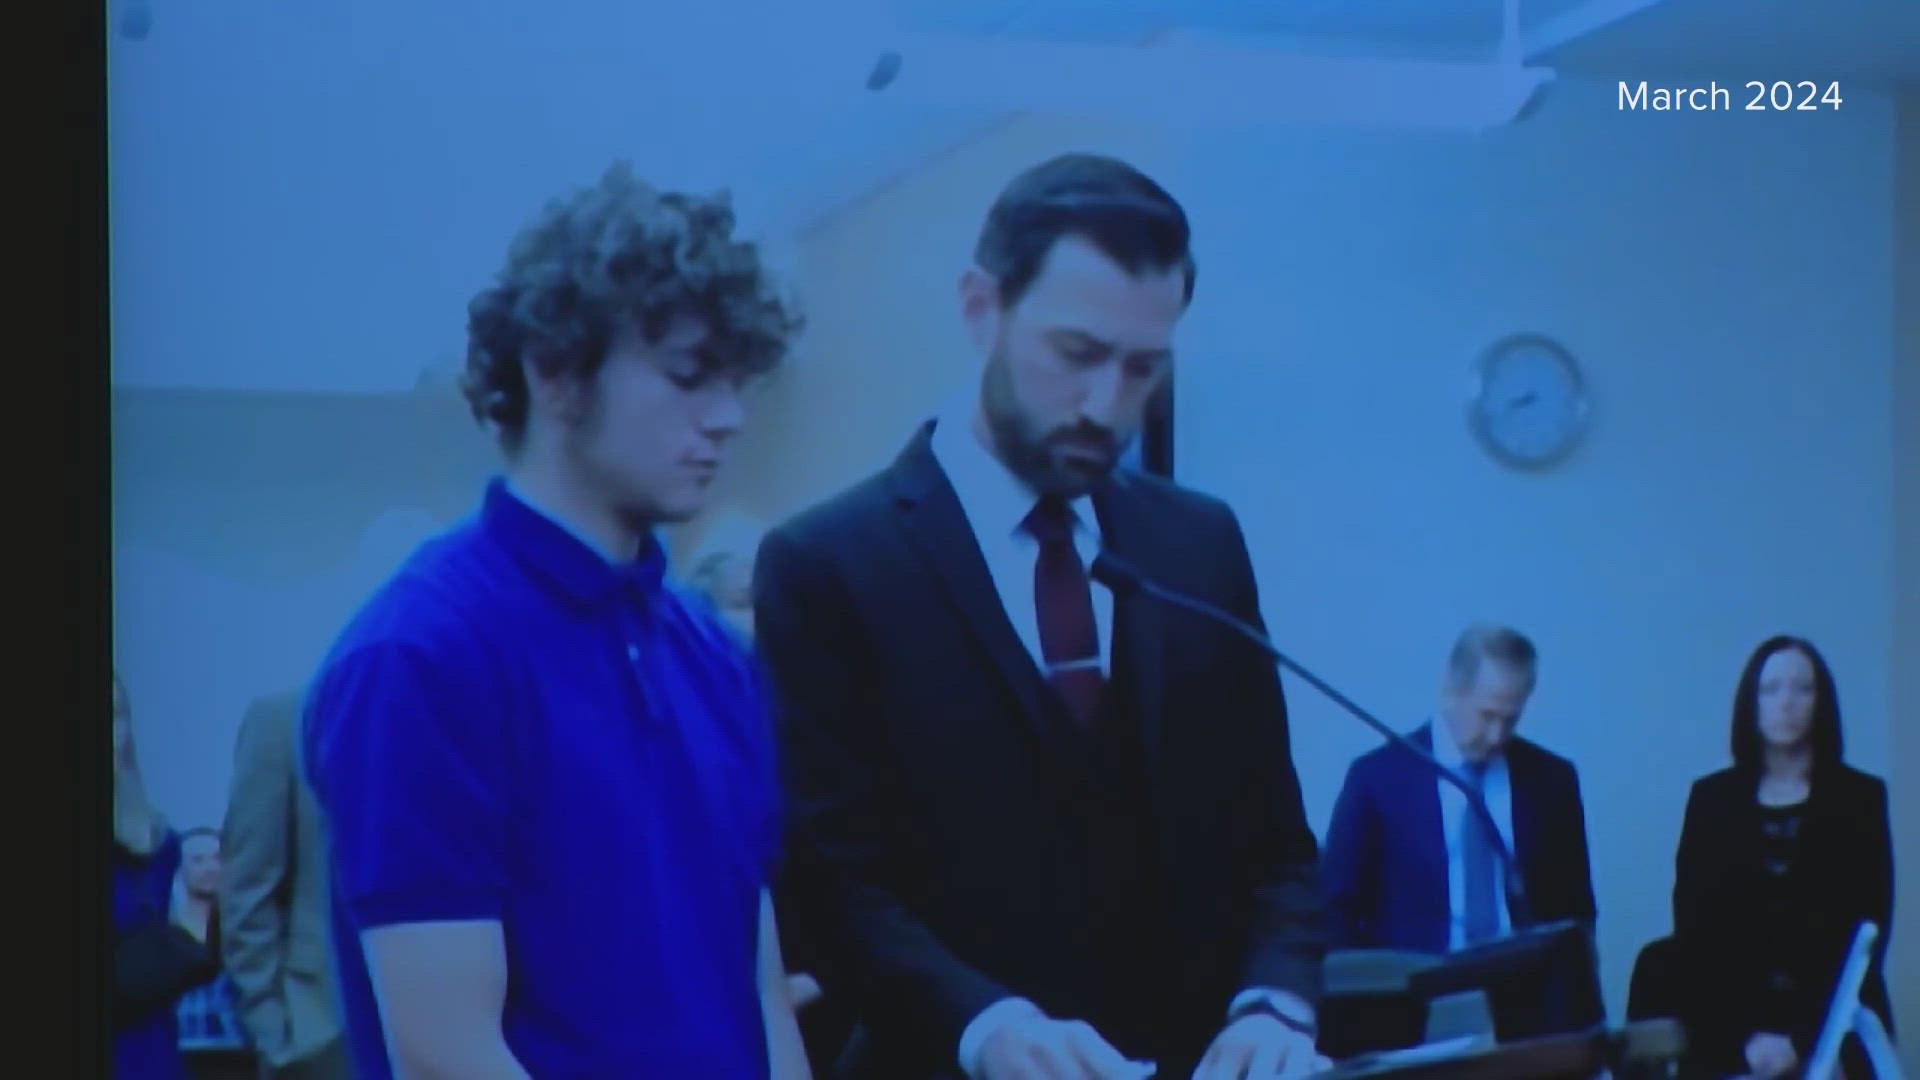 17-year-old Jacob Meisner, one of the suspects accused of killing Preston Lord, was sentenced Friday for two assaults that happened prior to Lord's death.